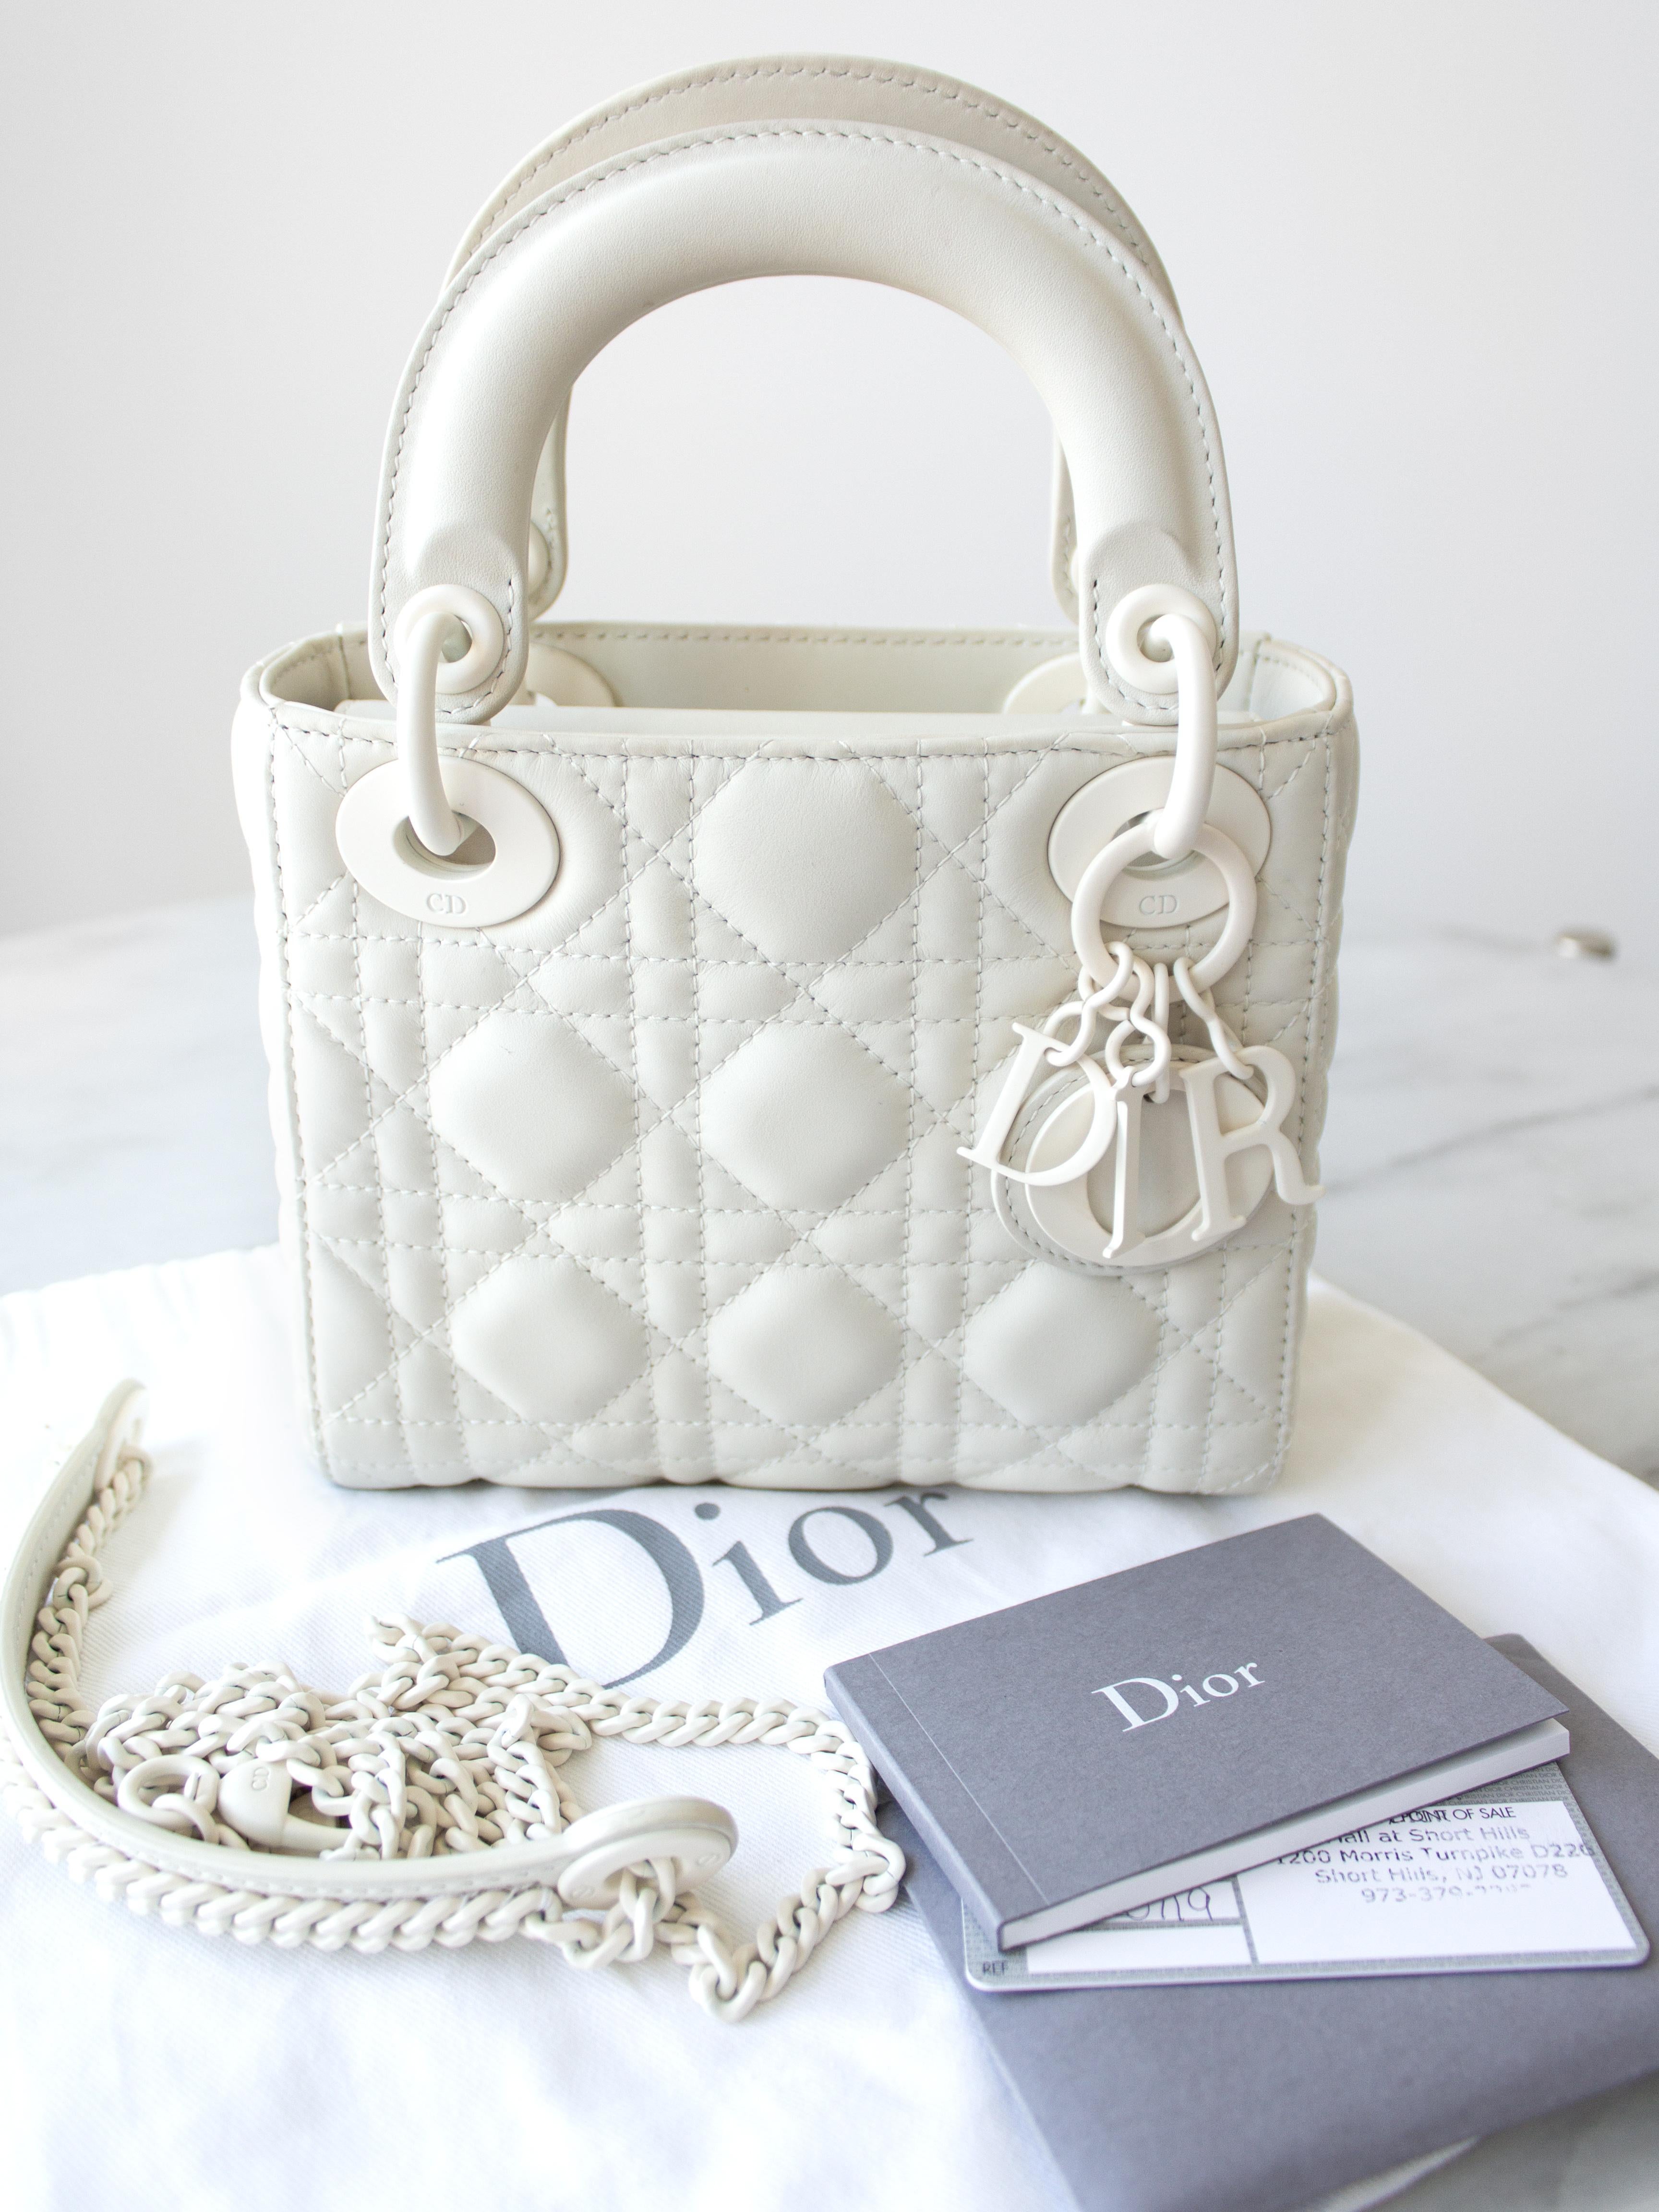 The ultra matte Lady Dior bag in mini size is a highly sought-after piece from 2019. Crafted in elegant matte white calfskin leather with a tonal suede lining, this bag exudes sophistication. It features leather top handles adorned with the classic